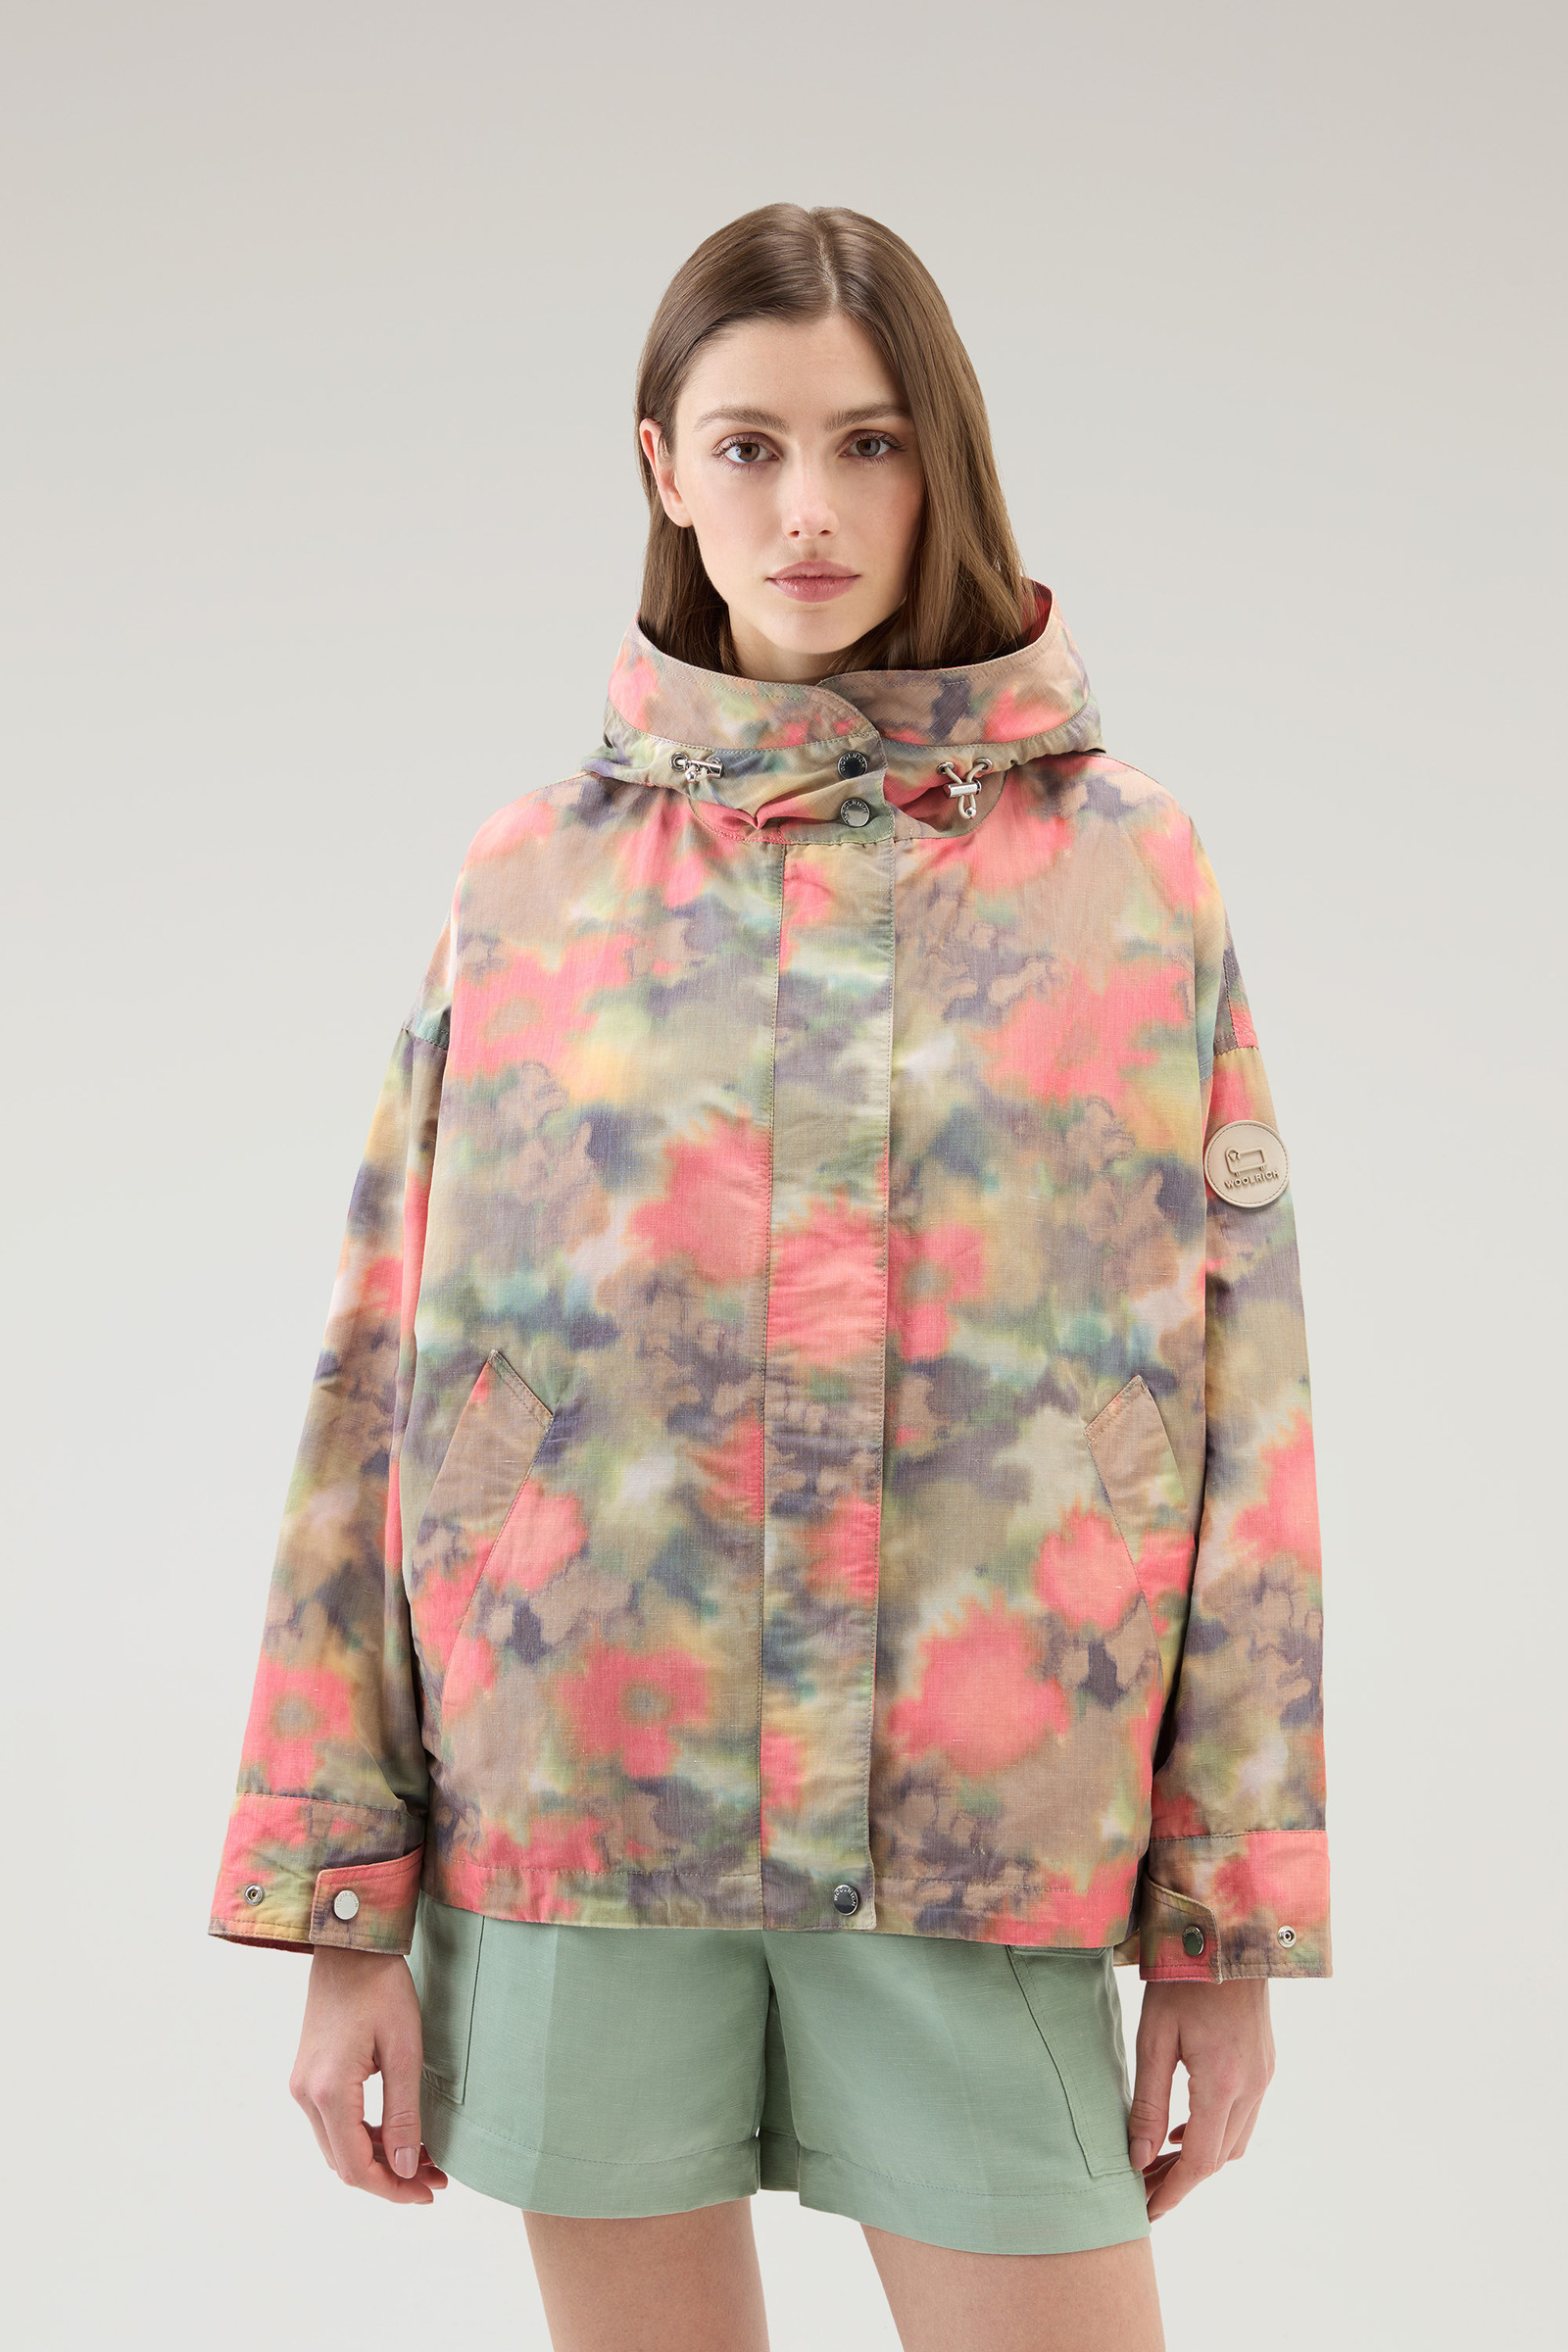 Jacket in a Cotton-linen Blend with a Multicolored Print - Women -  multicolor